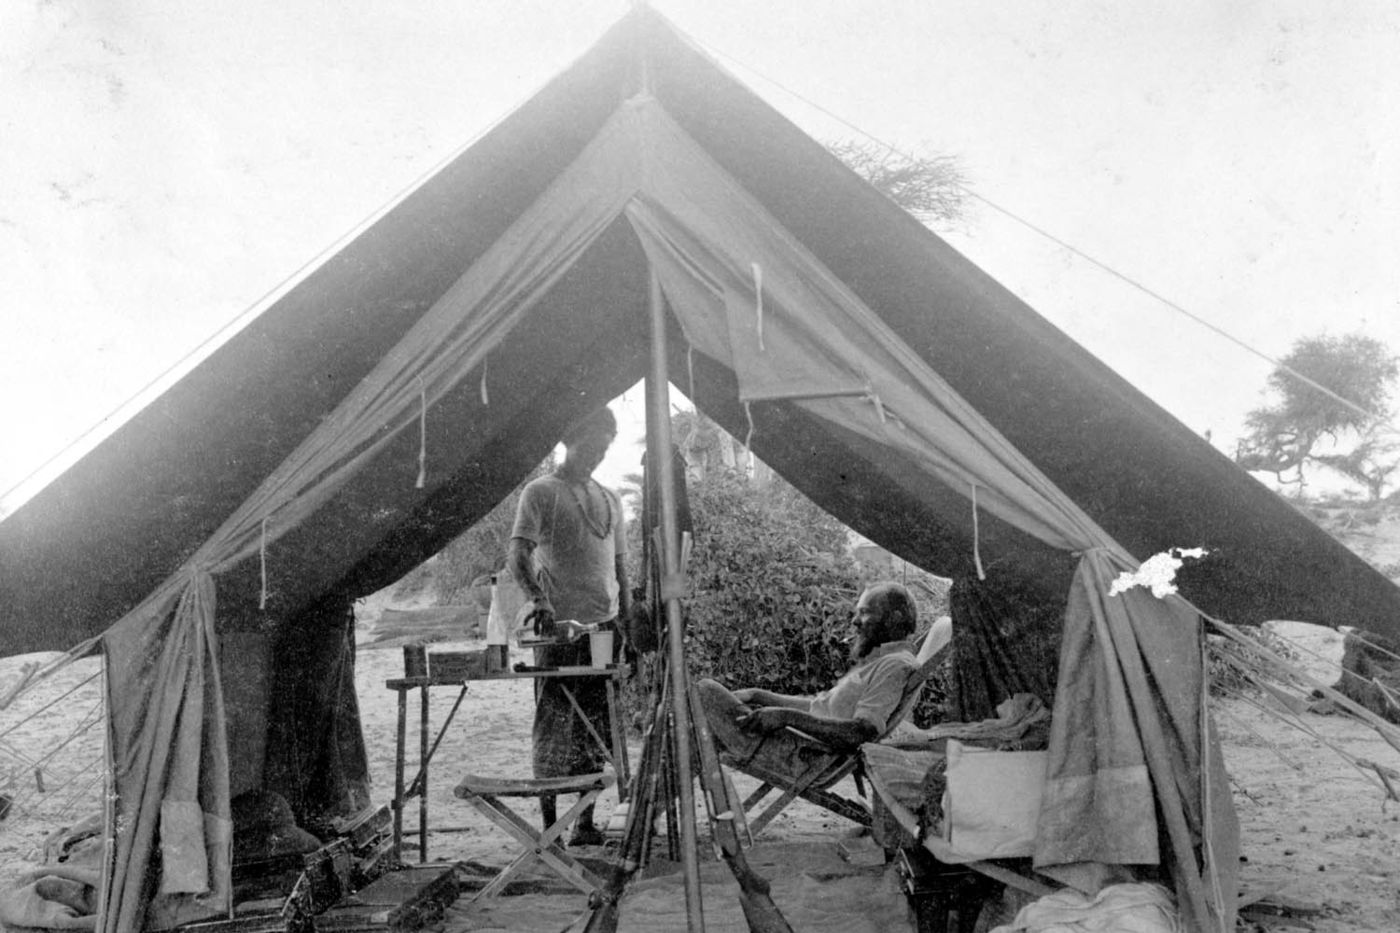 Media for Snapshot of 1896 Expedition Life